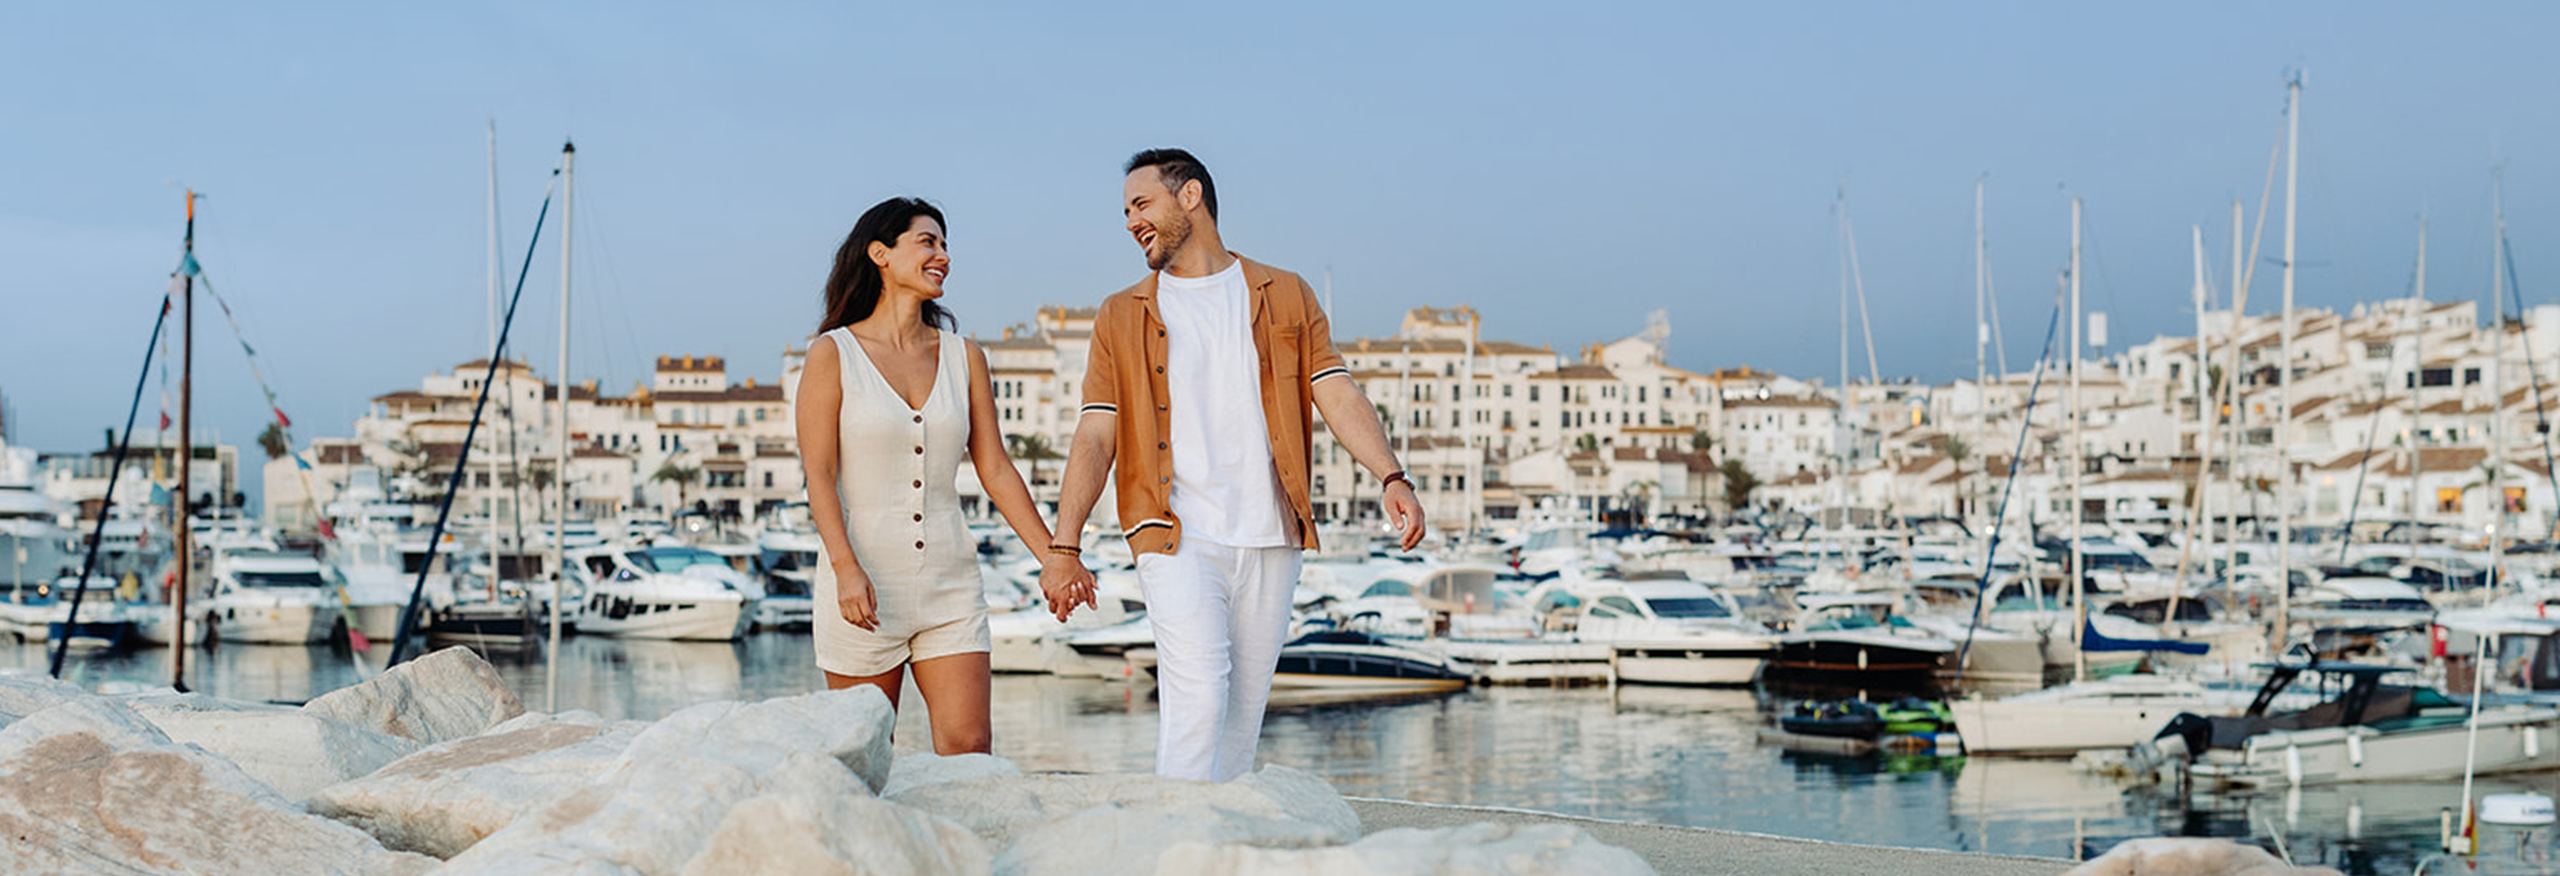 Couple holding hands walking in a marina